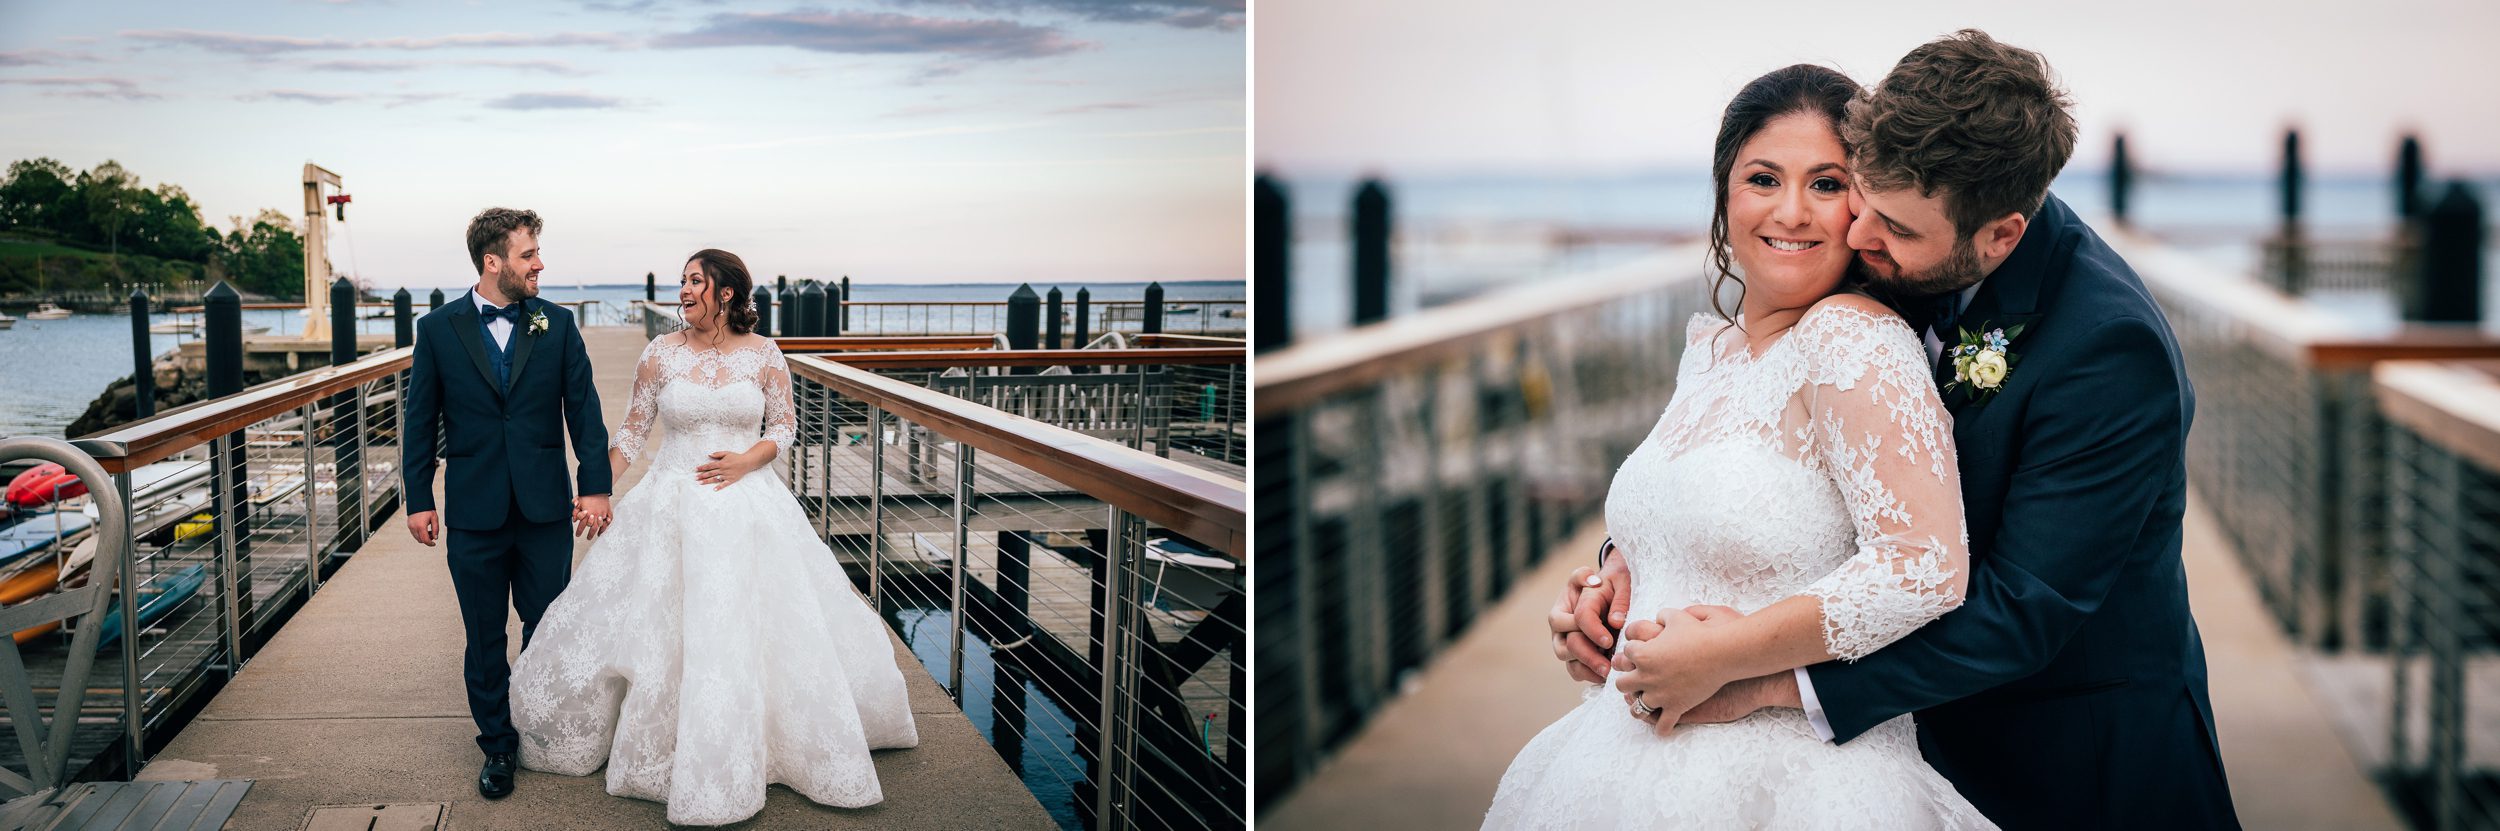 Bride and groom photo on the dock